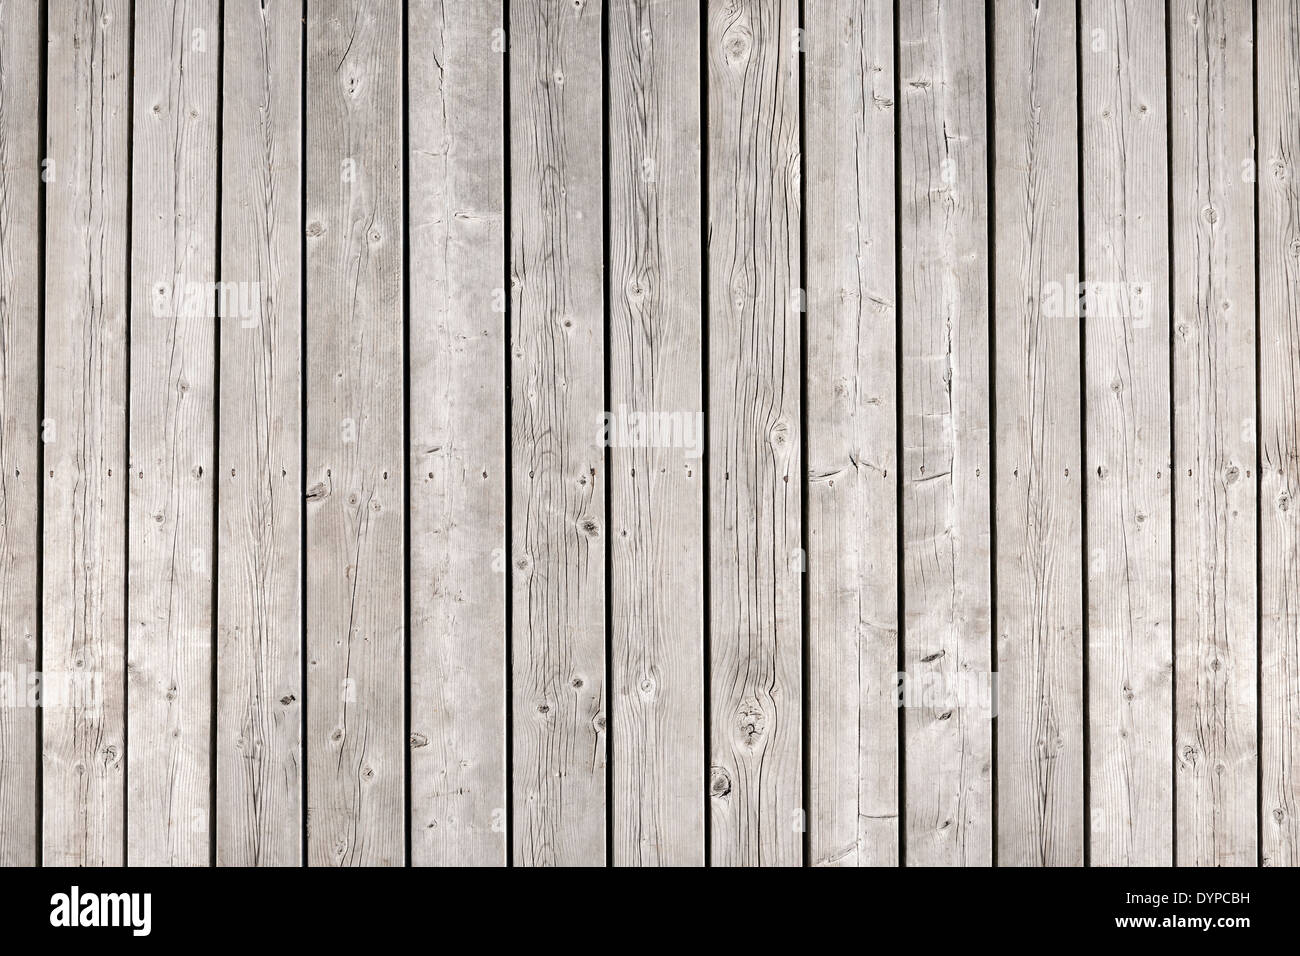 Background of old wooden weathered unpainted deck planks Stock Photo